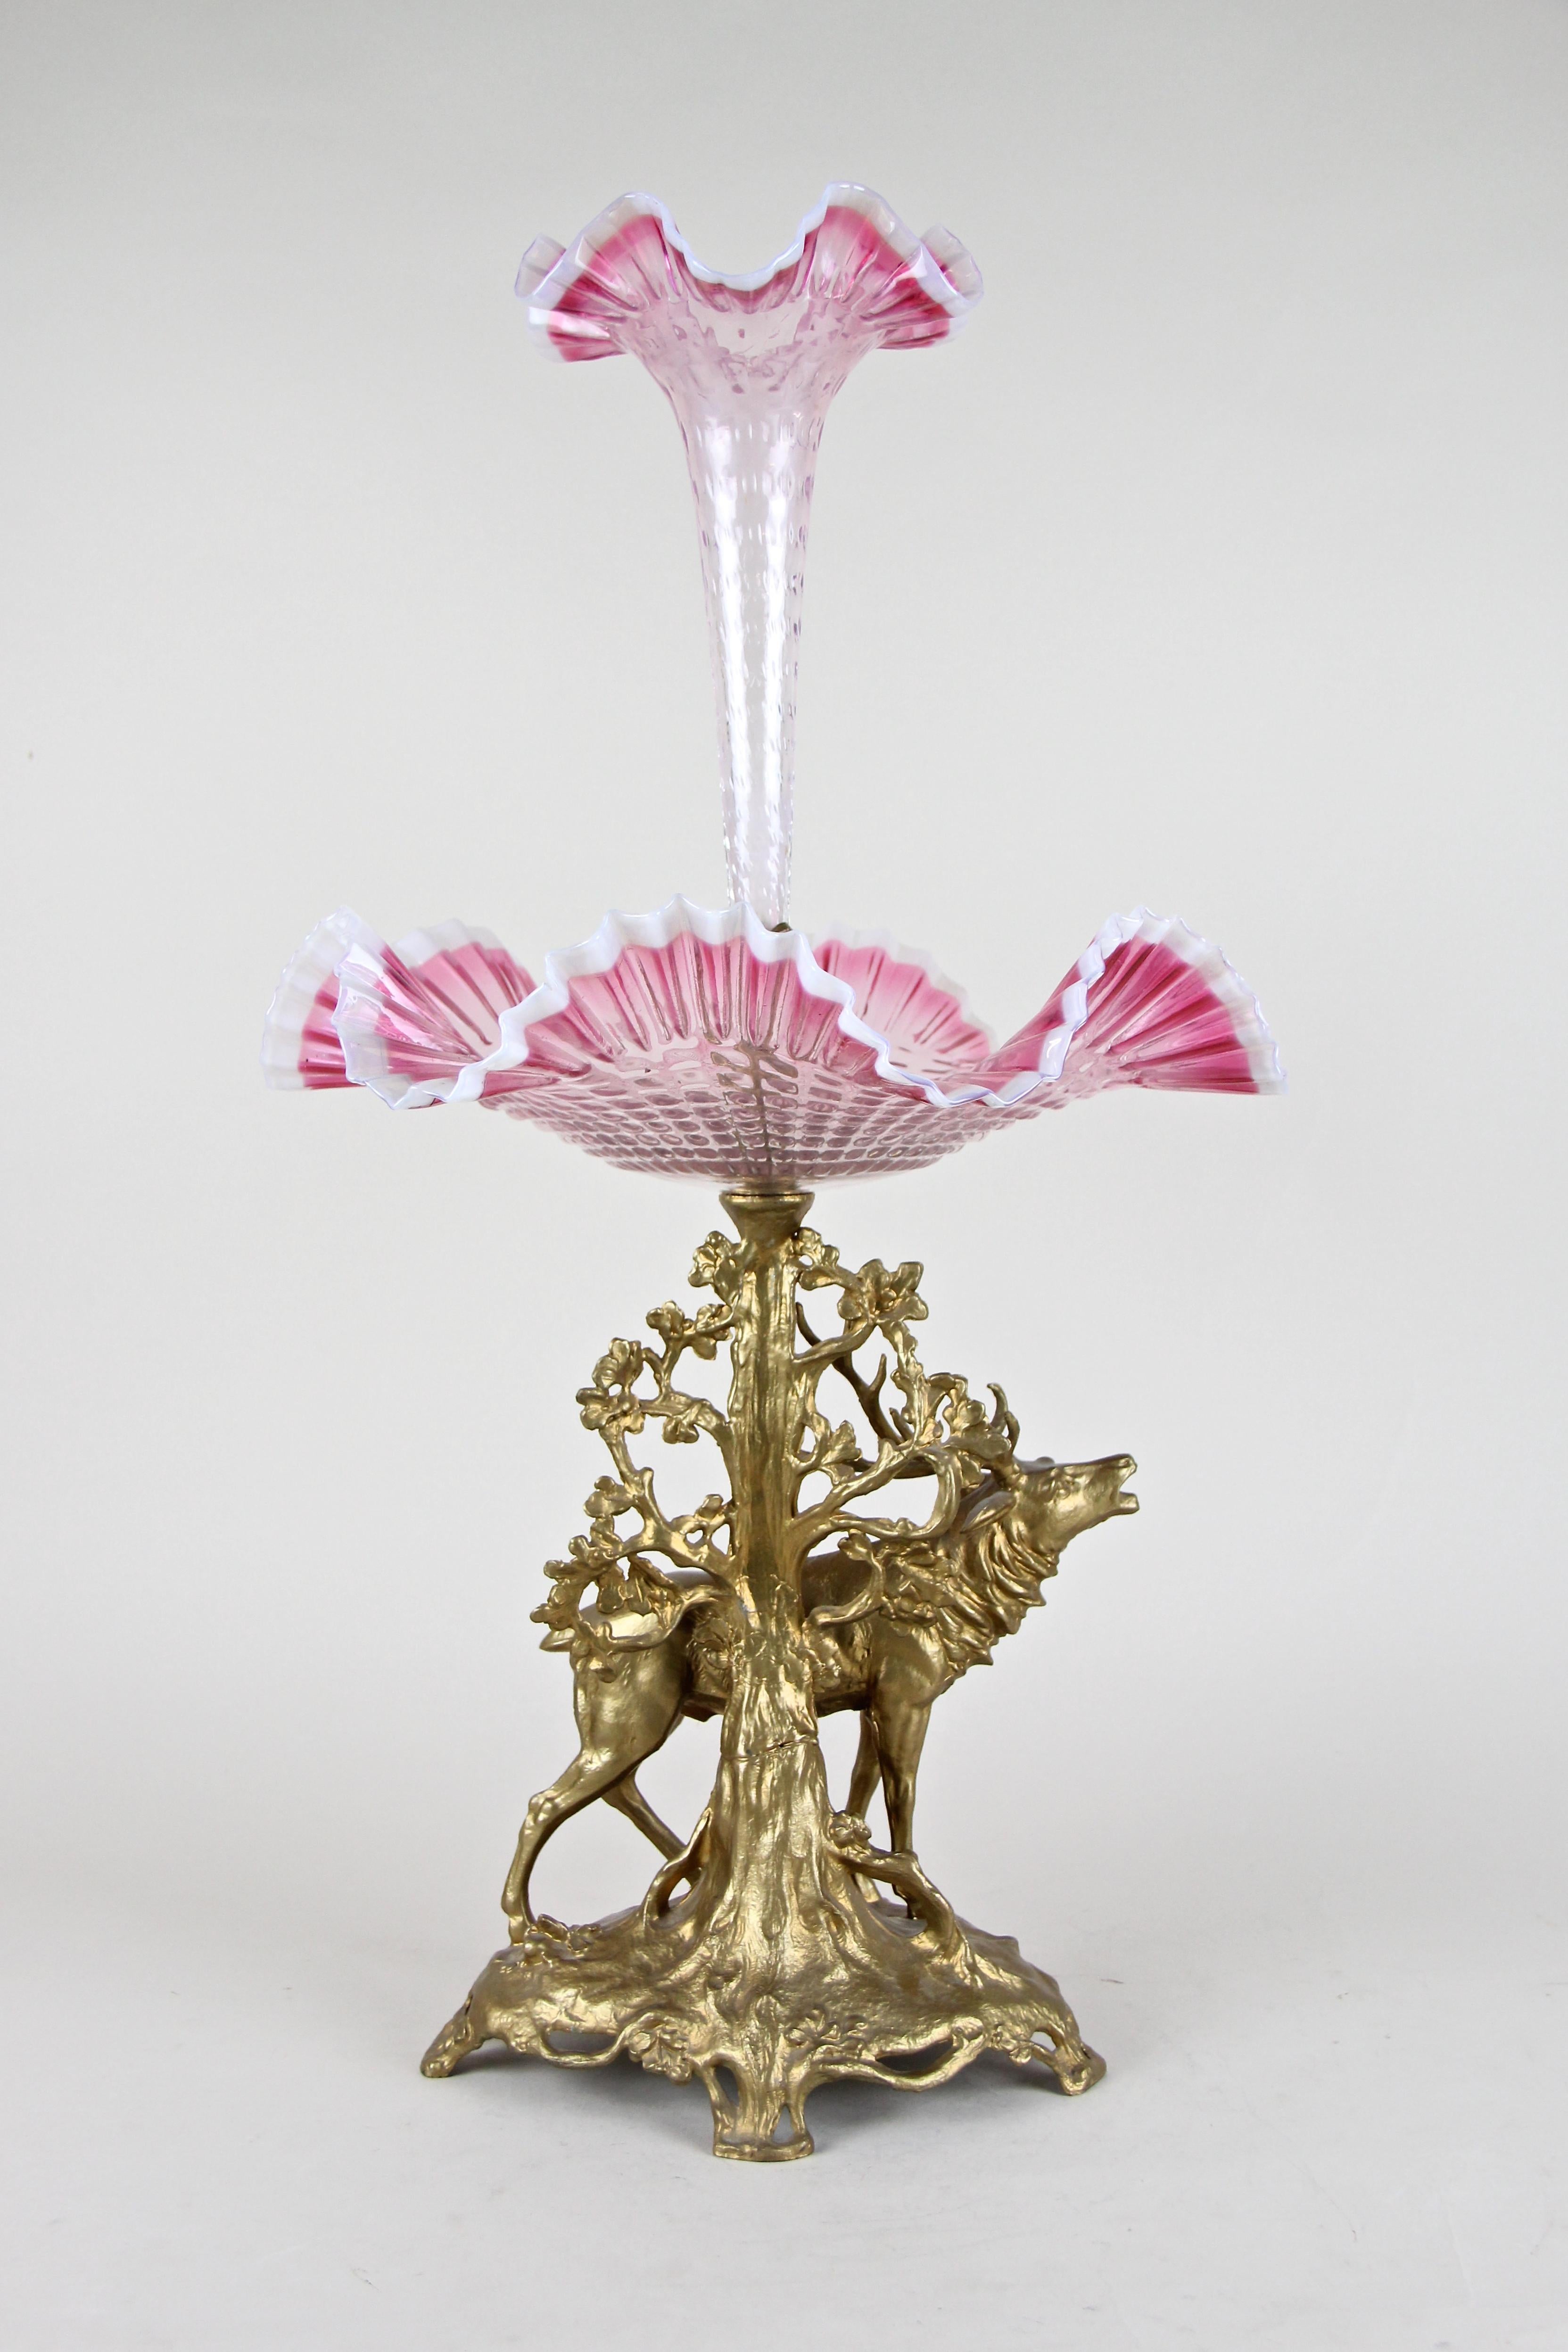 Blown Glass Art Nouveau Centerpiece with Stag Frilly Glass Bowl or Vase, Austria, circa 1900